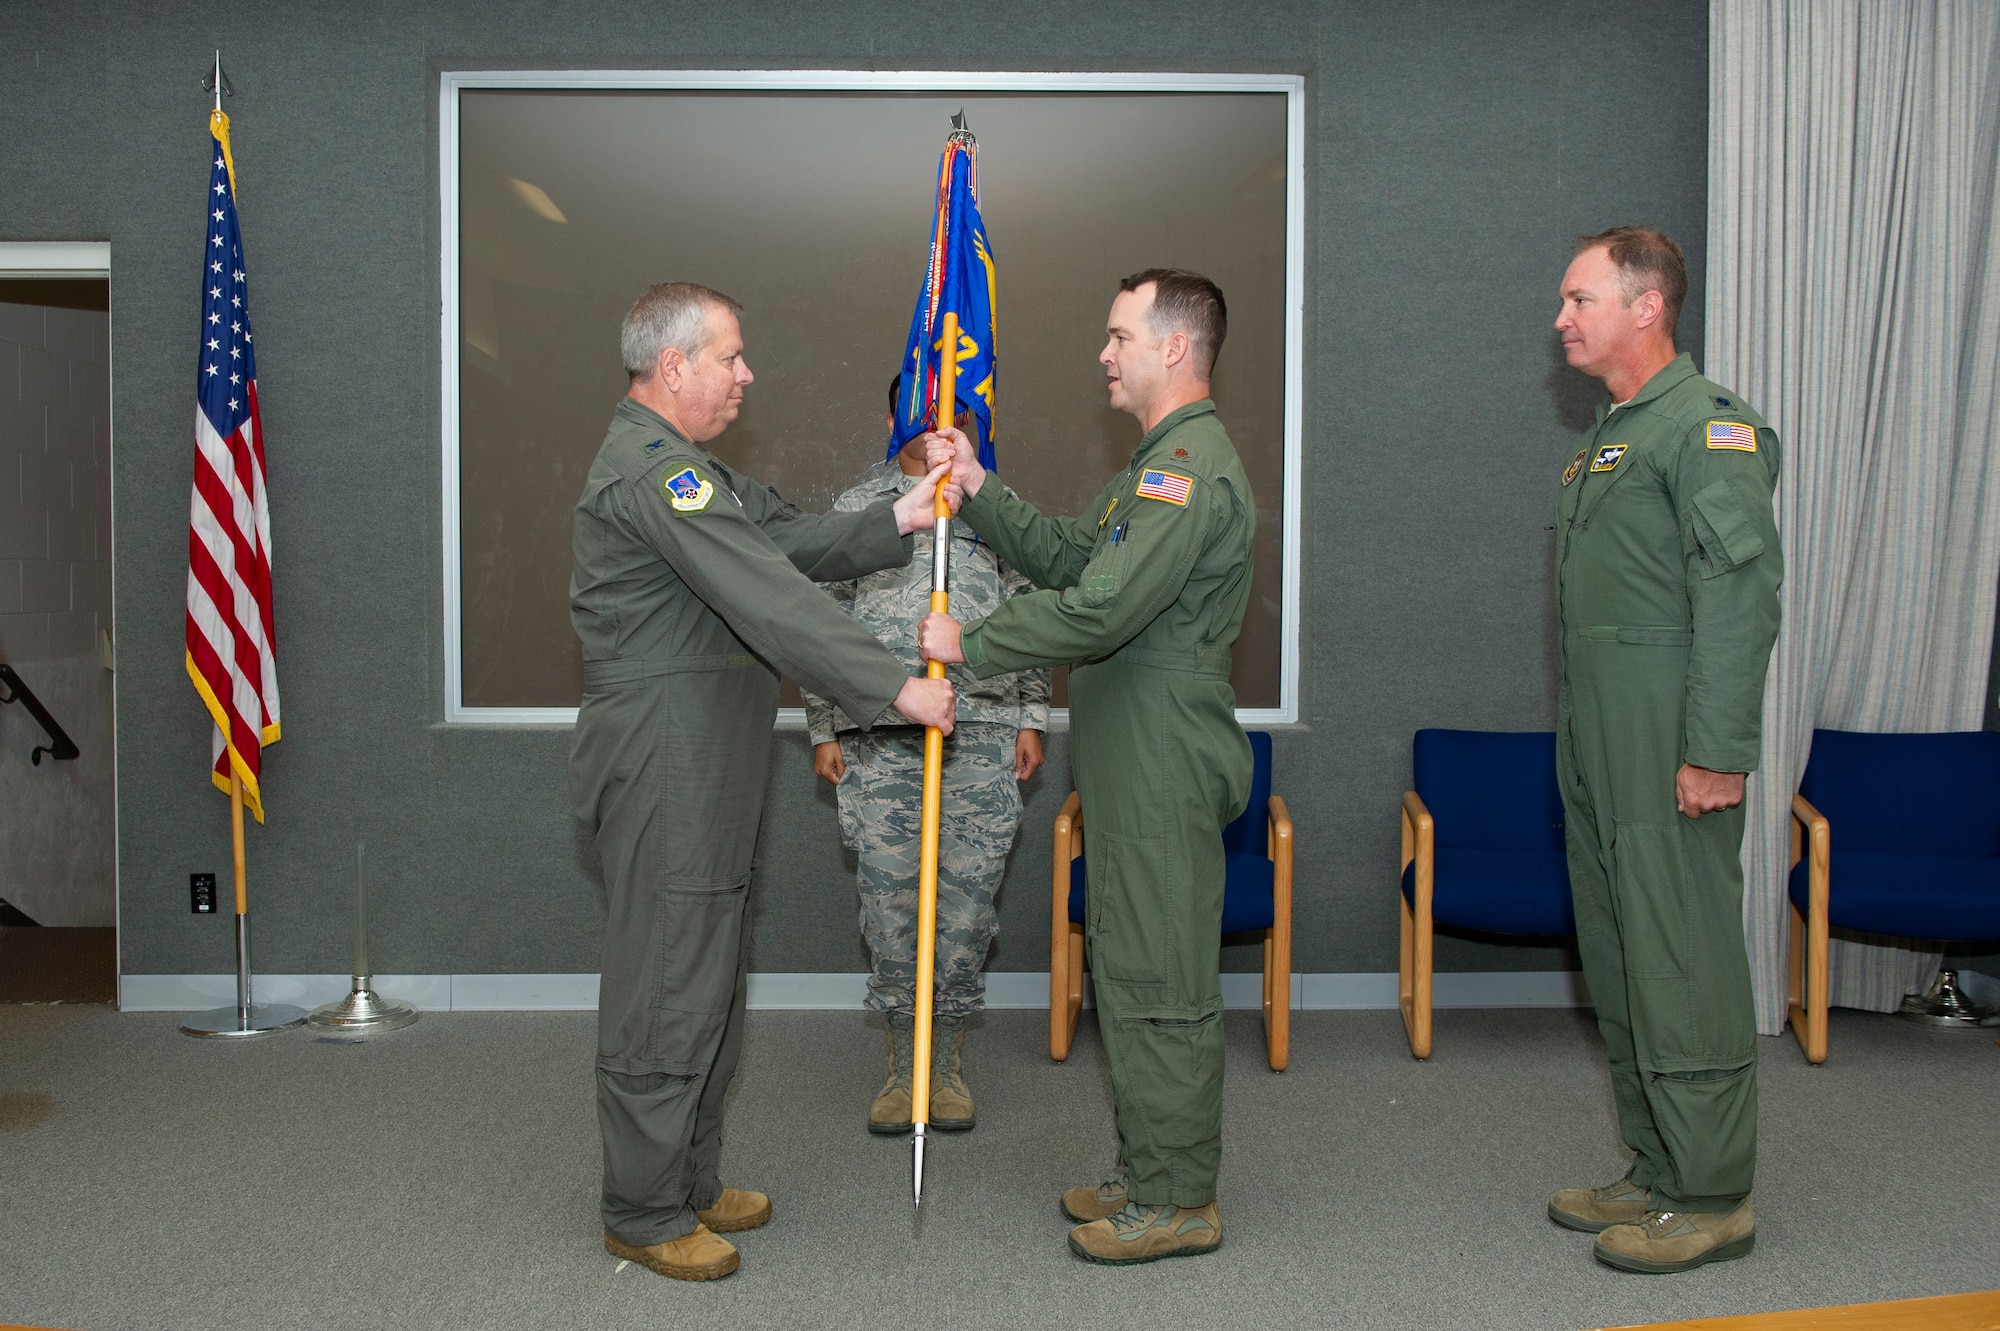 U.S. Air Force Col. Brian Hollis, 434th Operations Group commander, hands the 72nd Air Refueling Squadron guidon to Maj. Derek Portlock, 72nd ARS incoming commander, during a change of command ceremony at Grissom Air Reserve base, Indiana, Sept. 12, 2020. Portlock received command of the 72nd ARS from Lt. Col. Joe Austin, 72nd ARS outgoing commander. (U.S. Air Force photo by Staff Sgt. Michael Hunsaker)